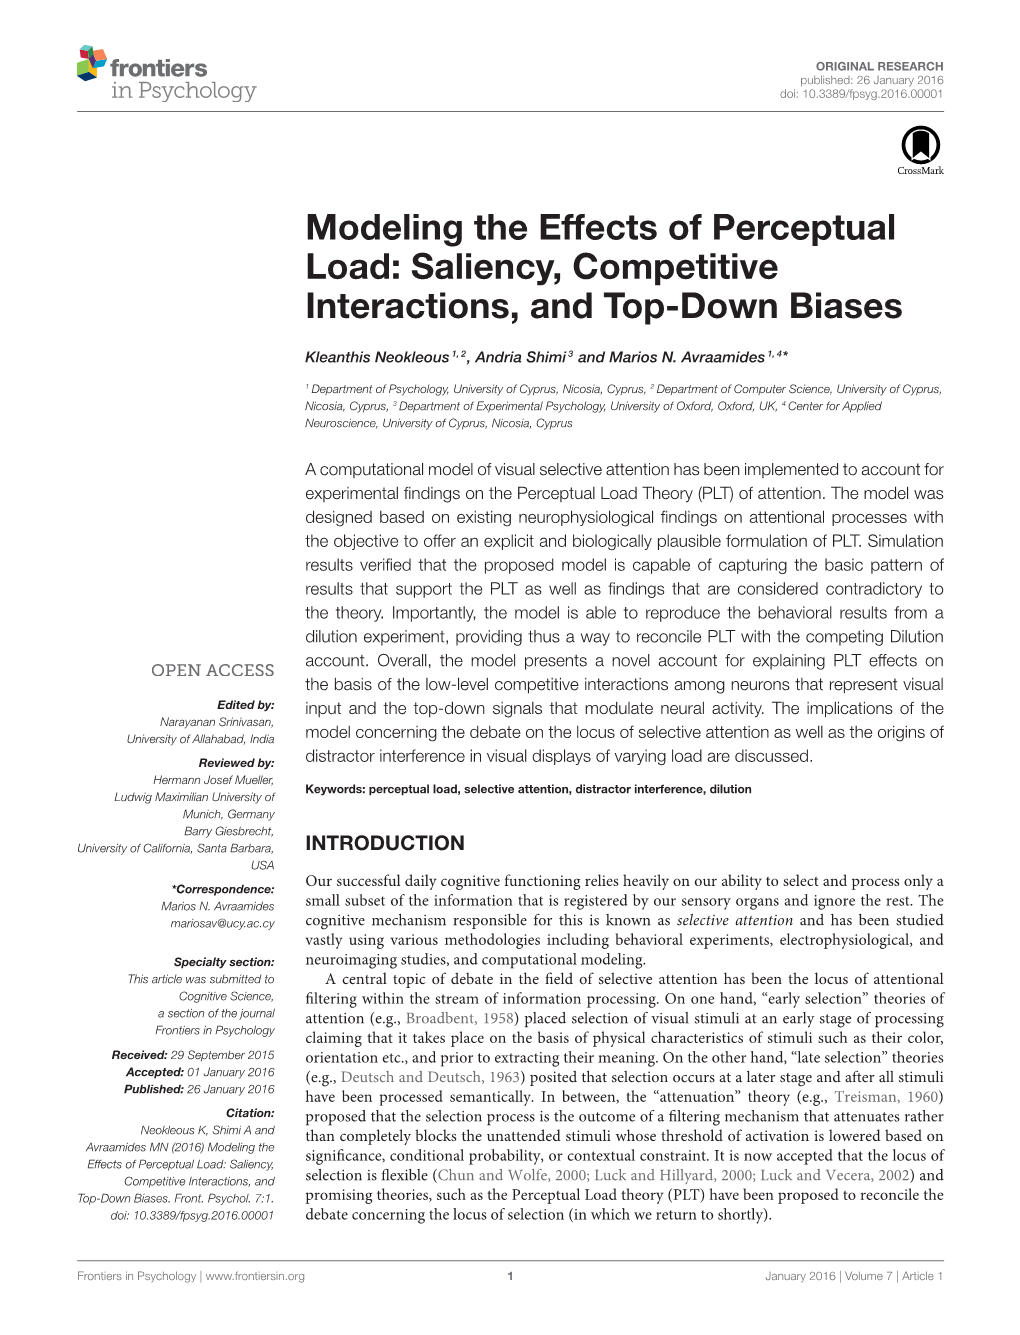 Modeling the Effects of Perceptual Load: Saliency, Competitive Interactions, and Top-Down Biases